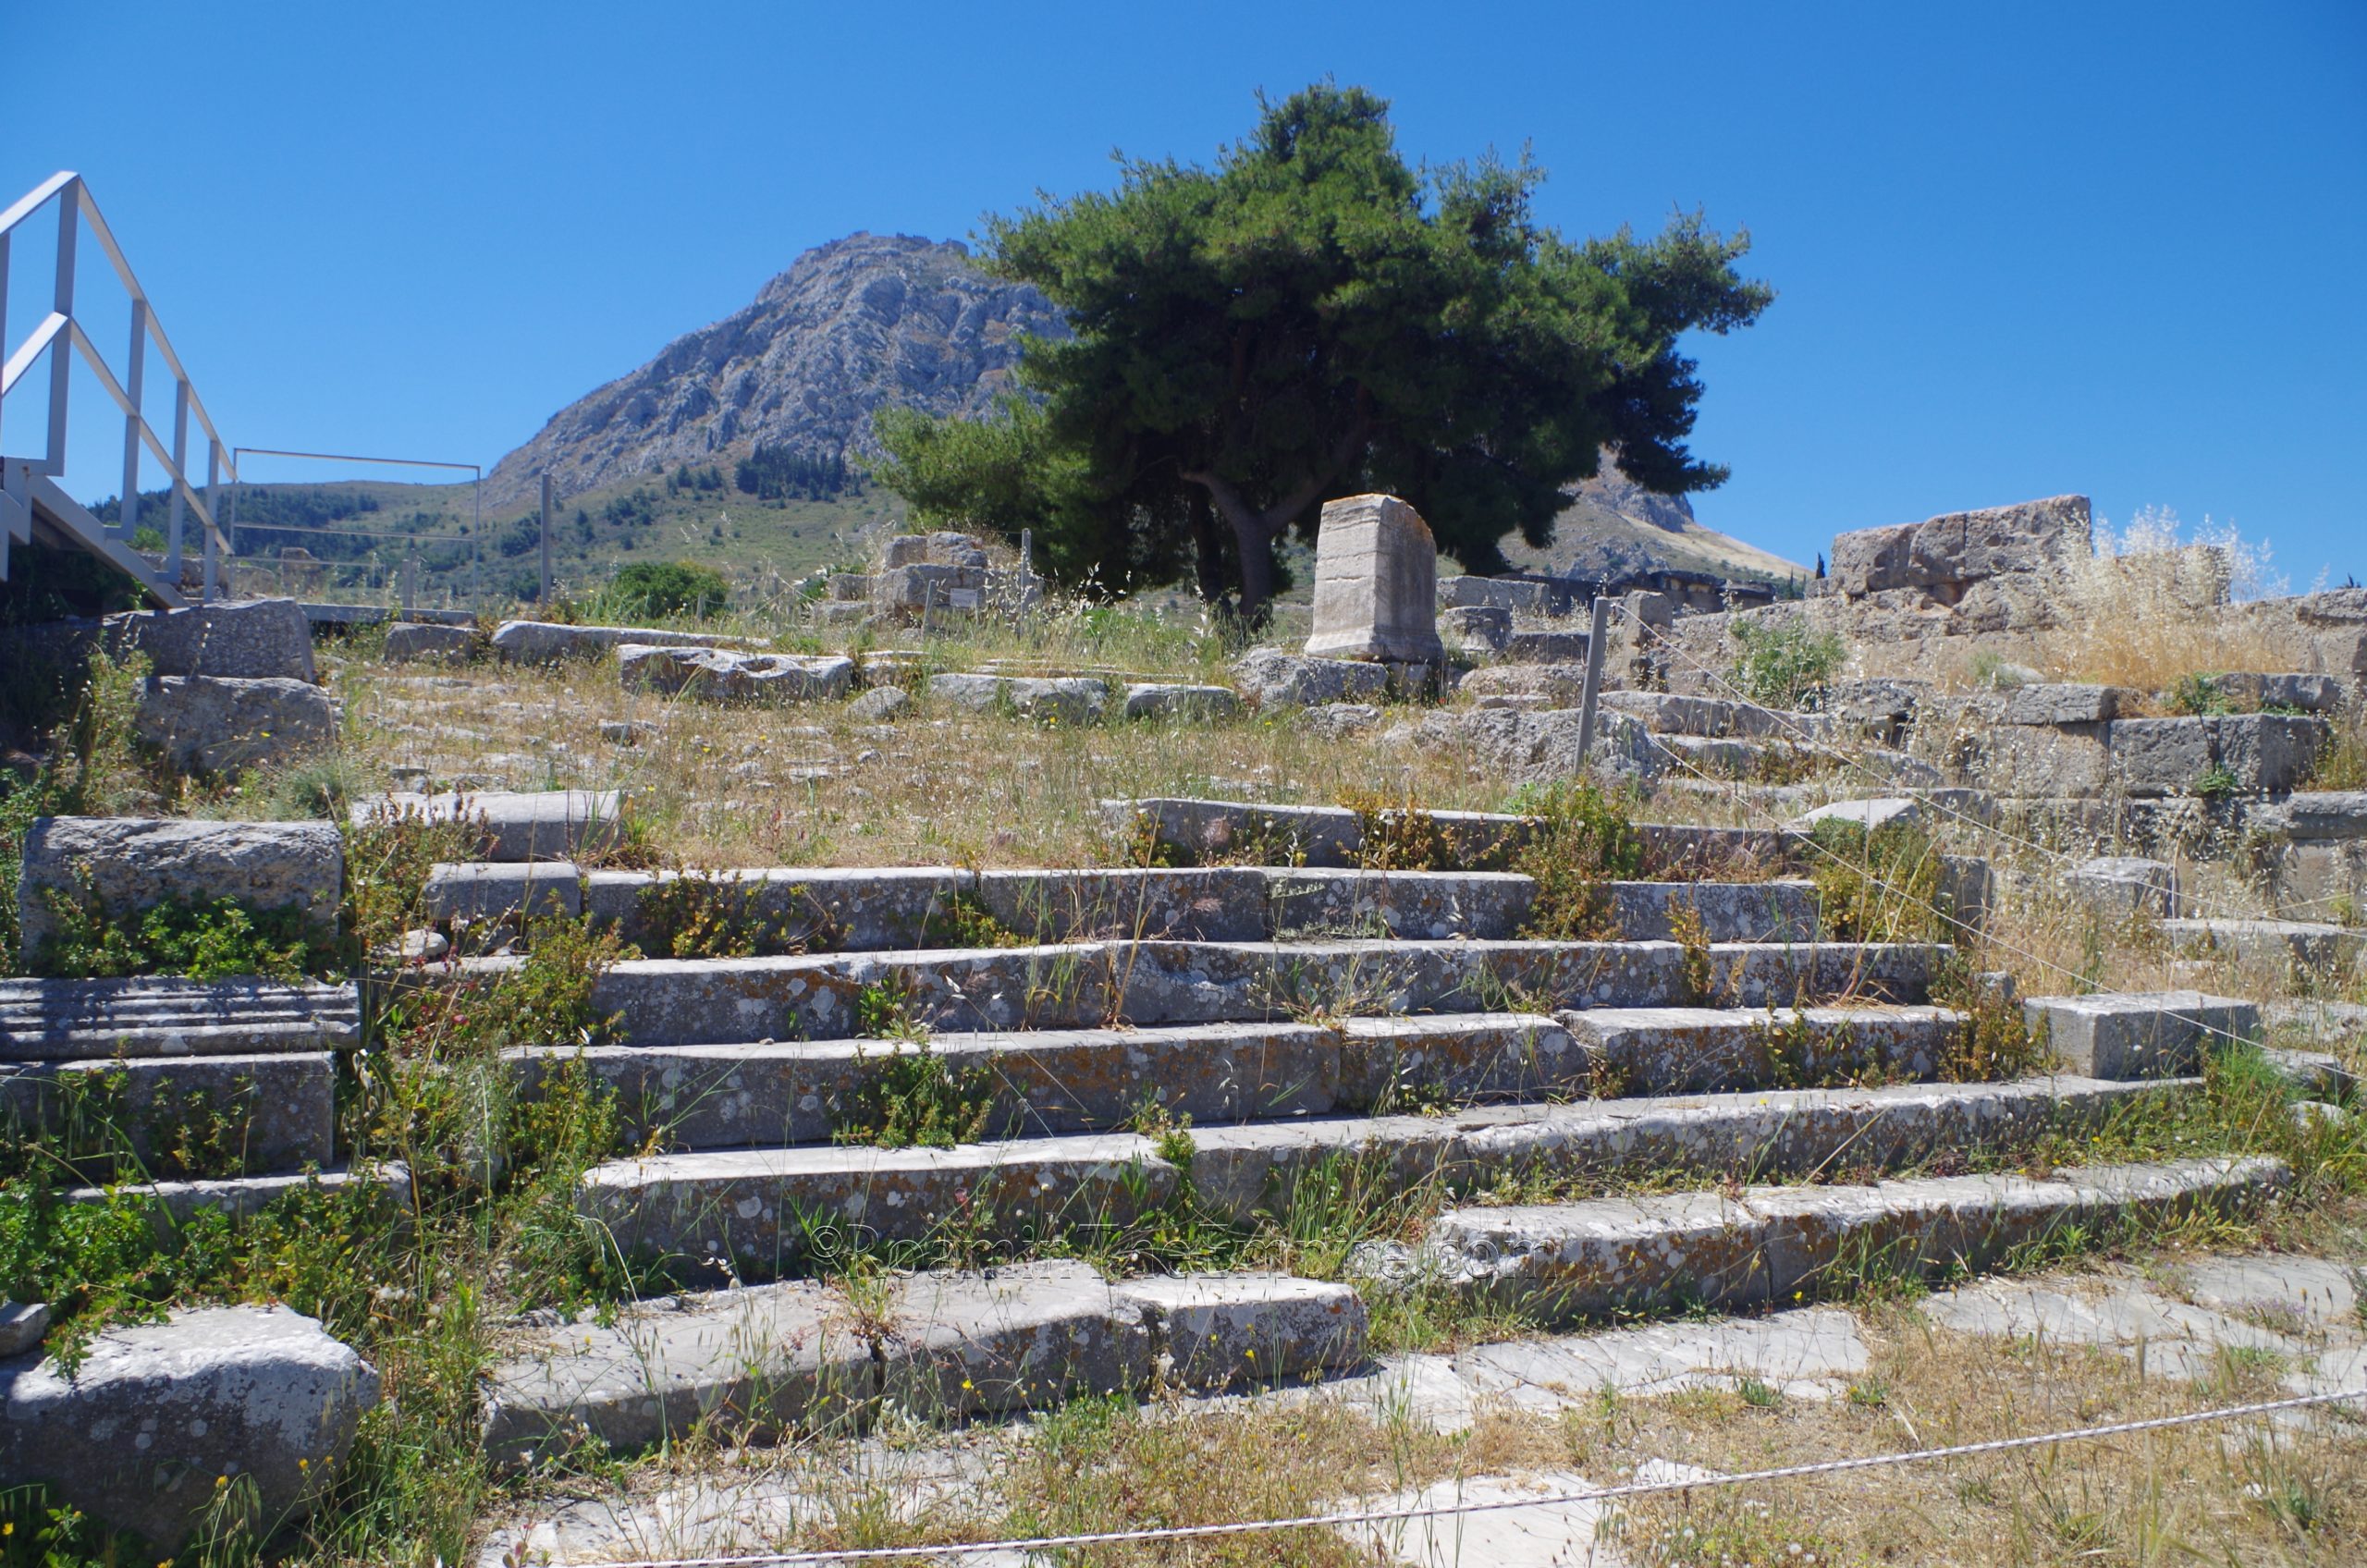 Staircase of the Propylaia.